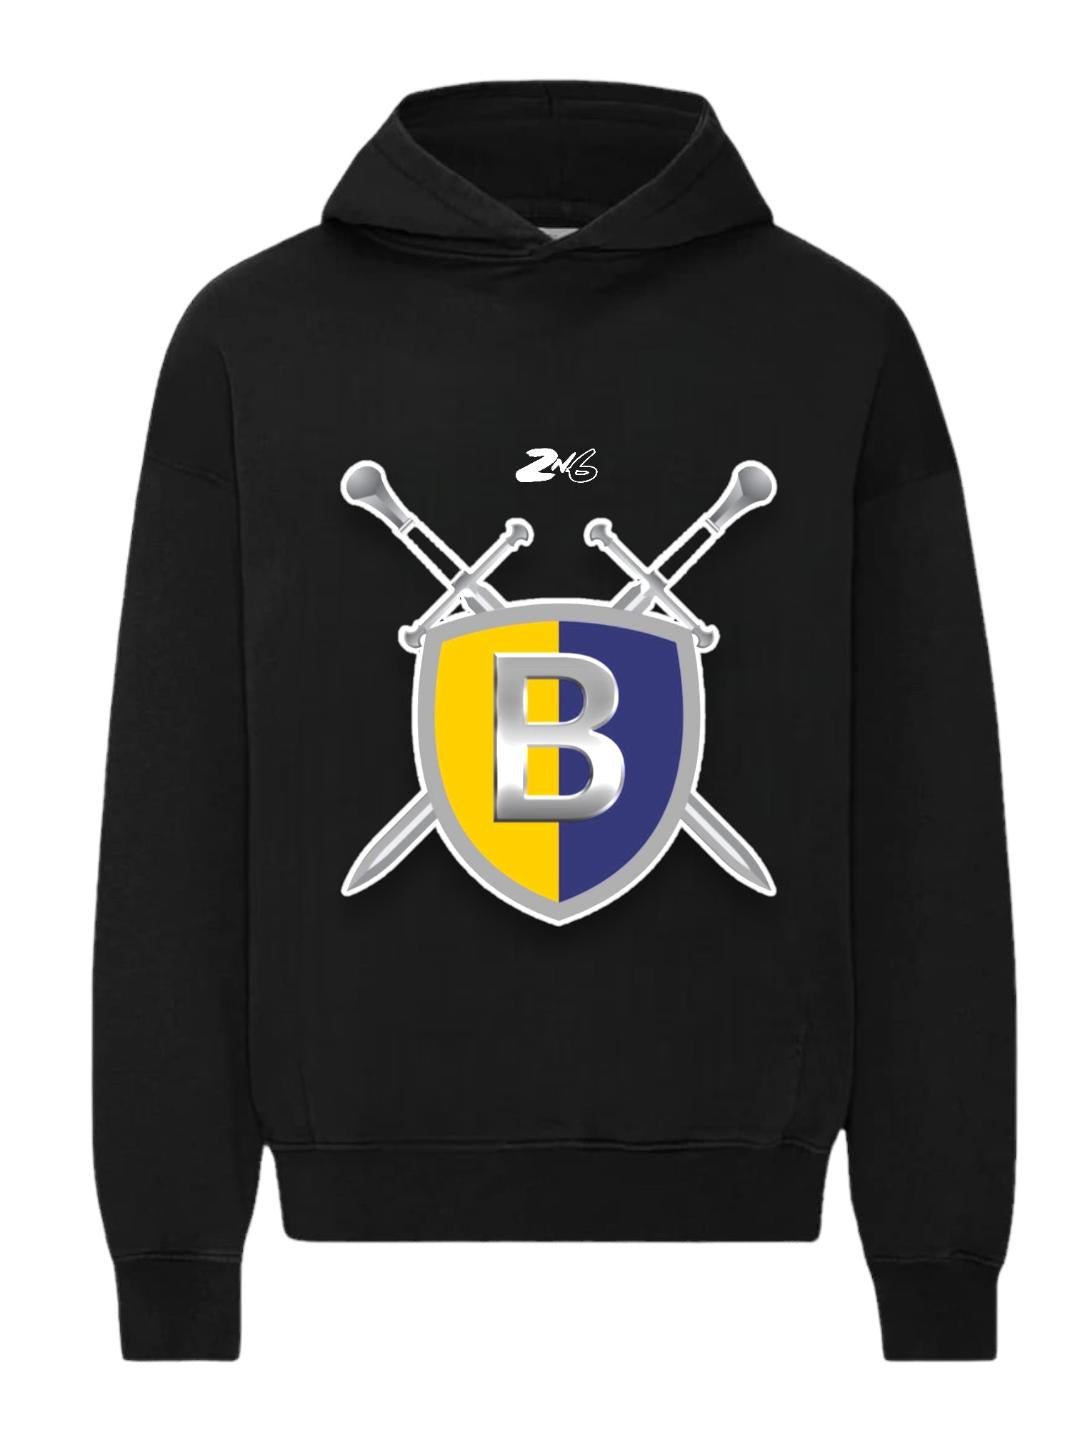 Limited Edition Ballou Knights Turkey Bowl Hoodie